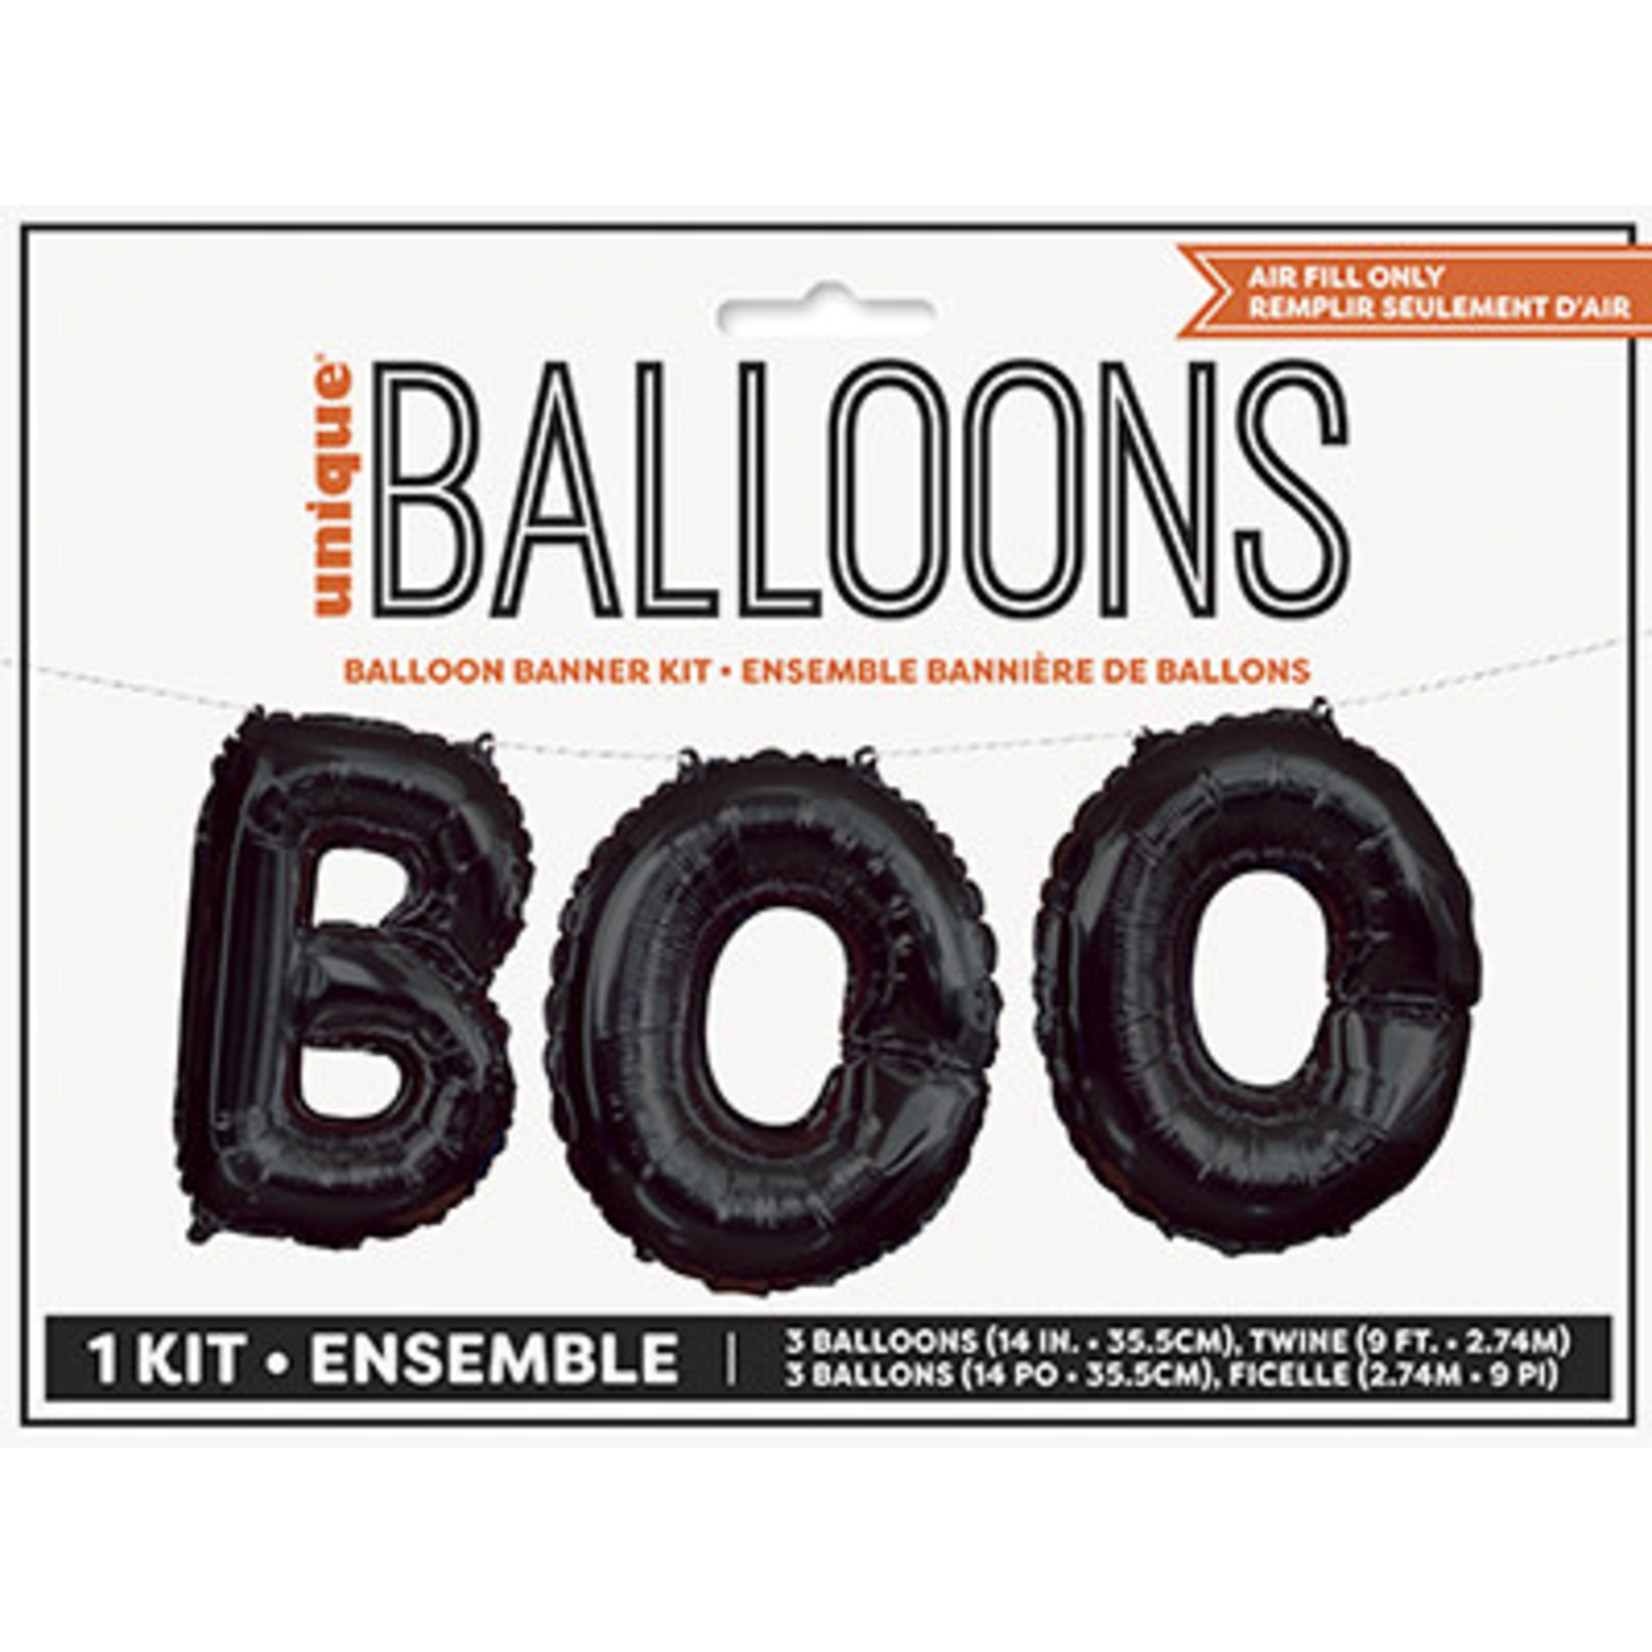 unique 'BOO' Balloon Banner Kit - !Air Fill Only!